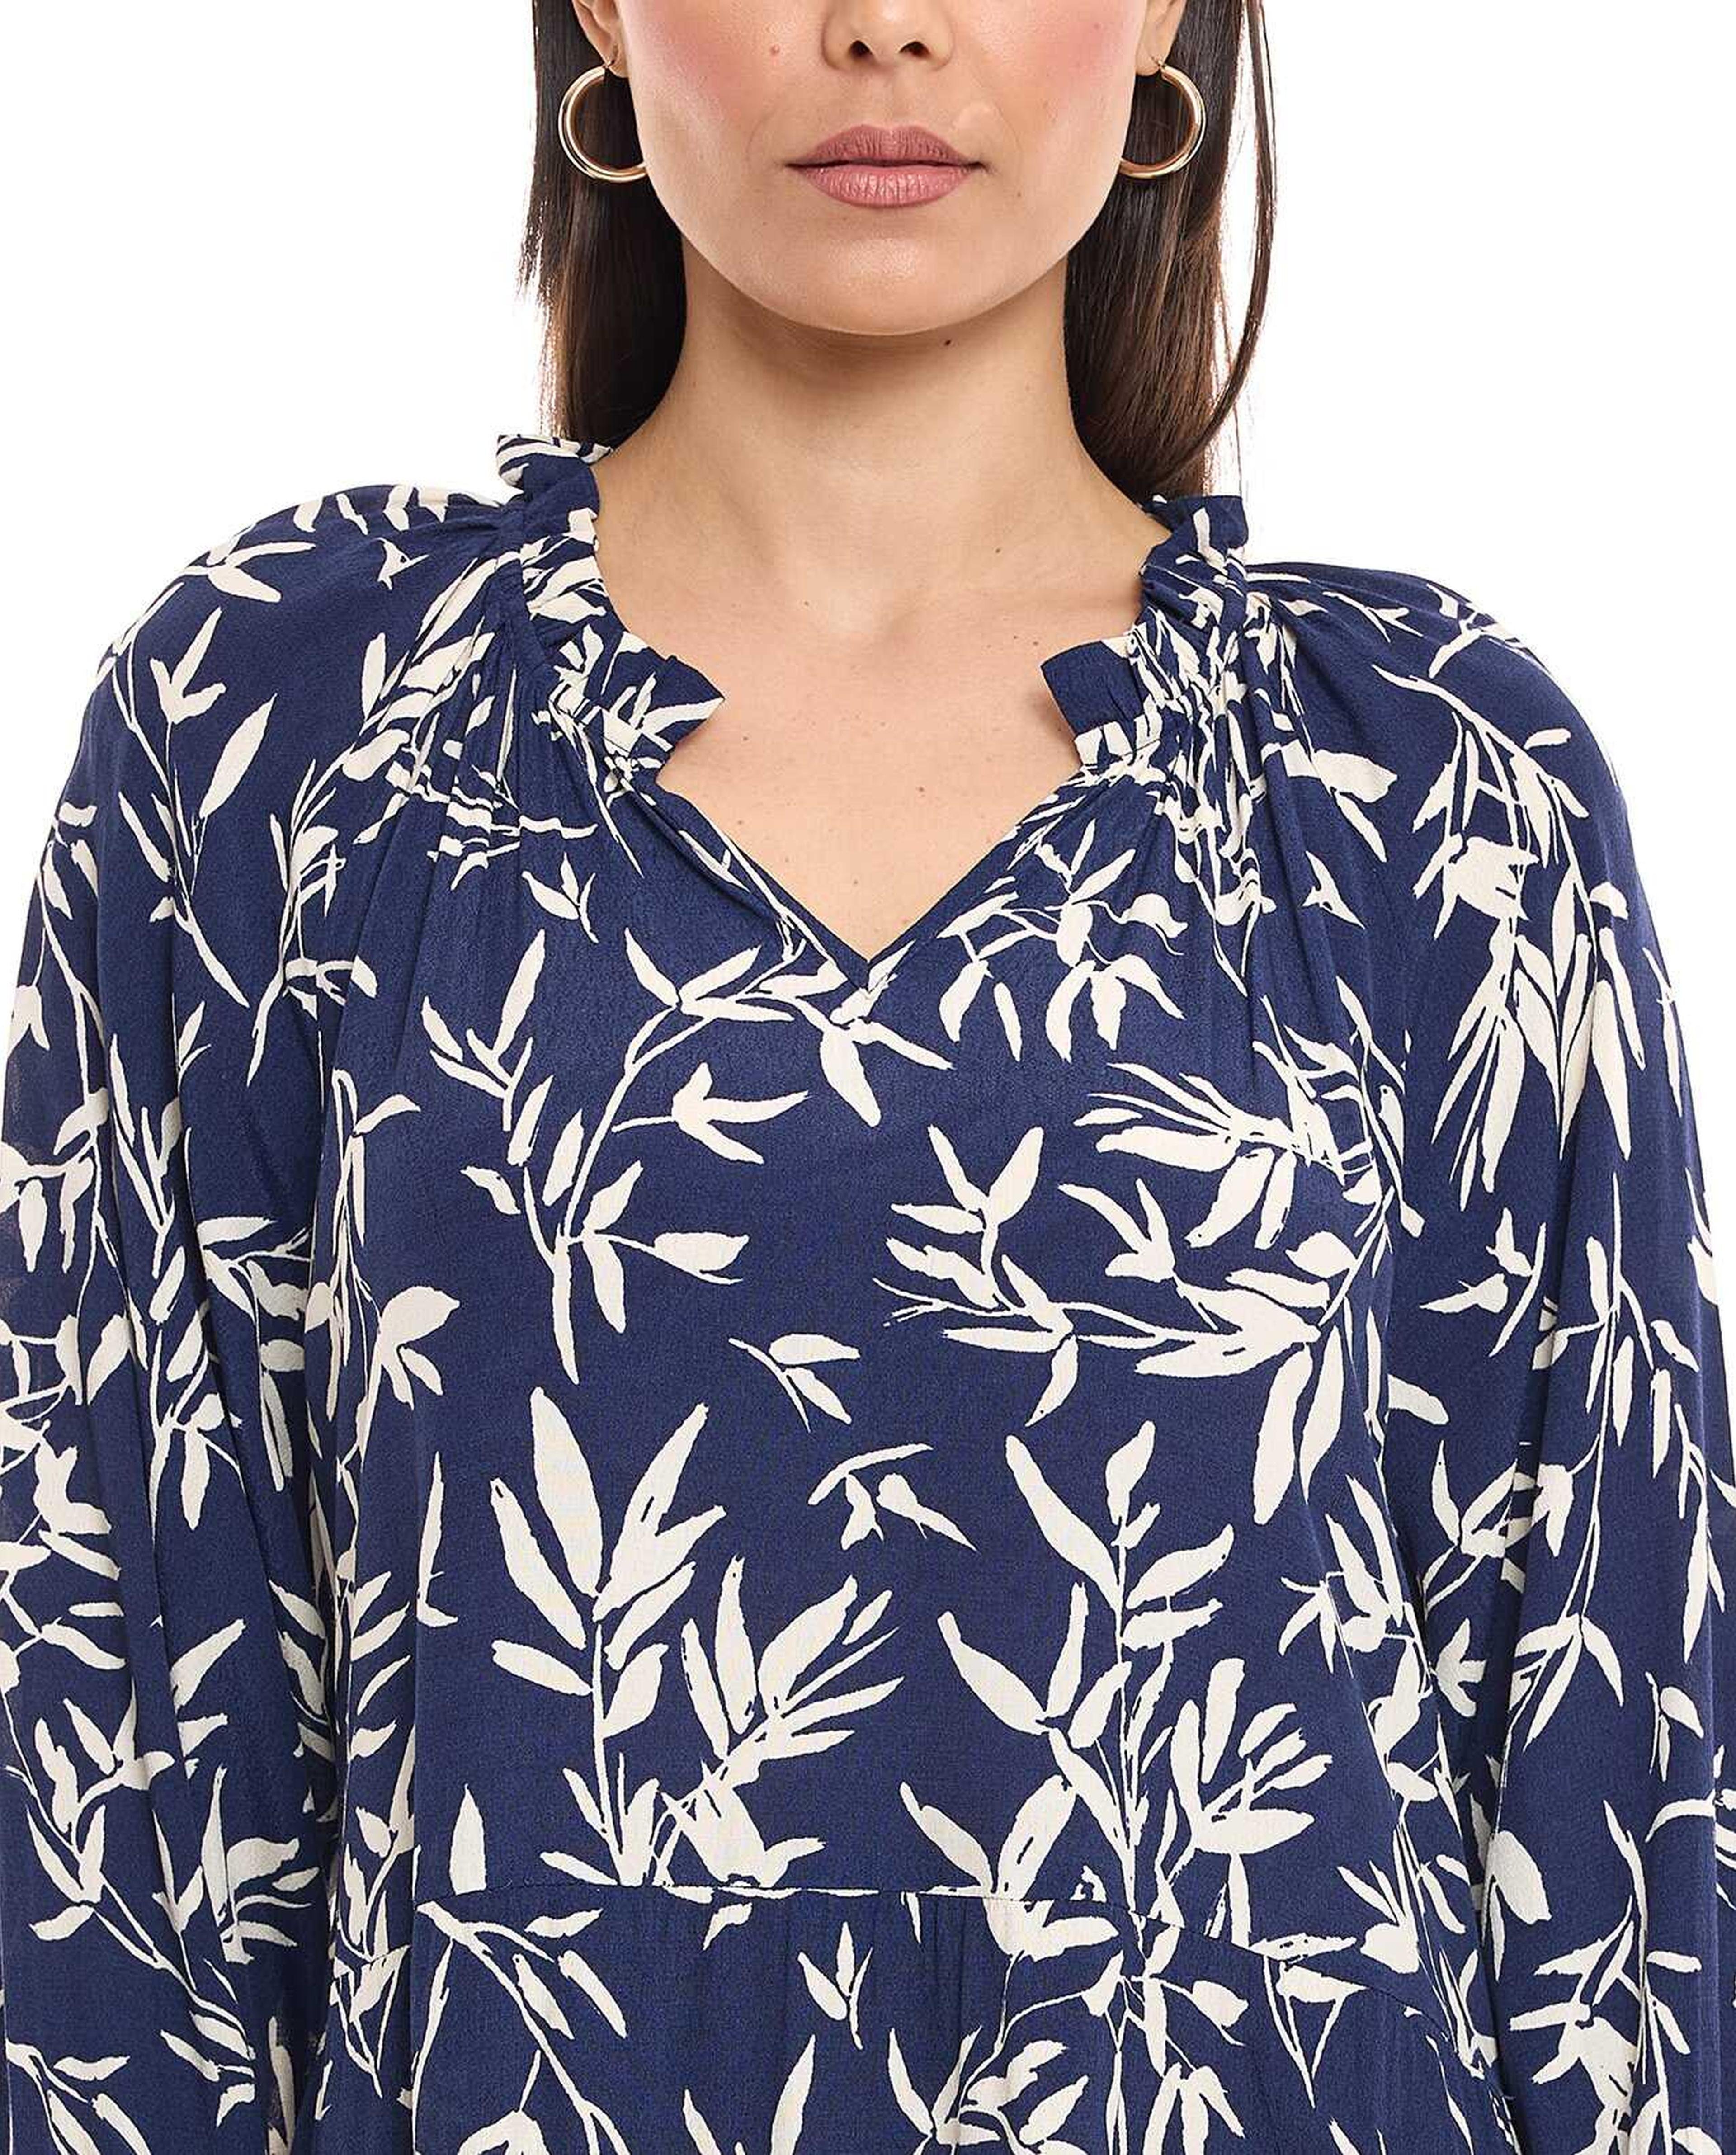 Floral Print A-Line Dress with V-Neck and Puff Sleeves